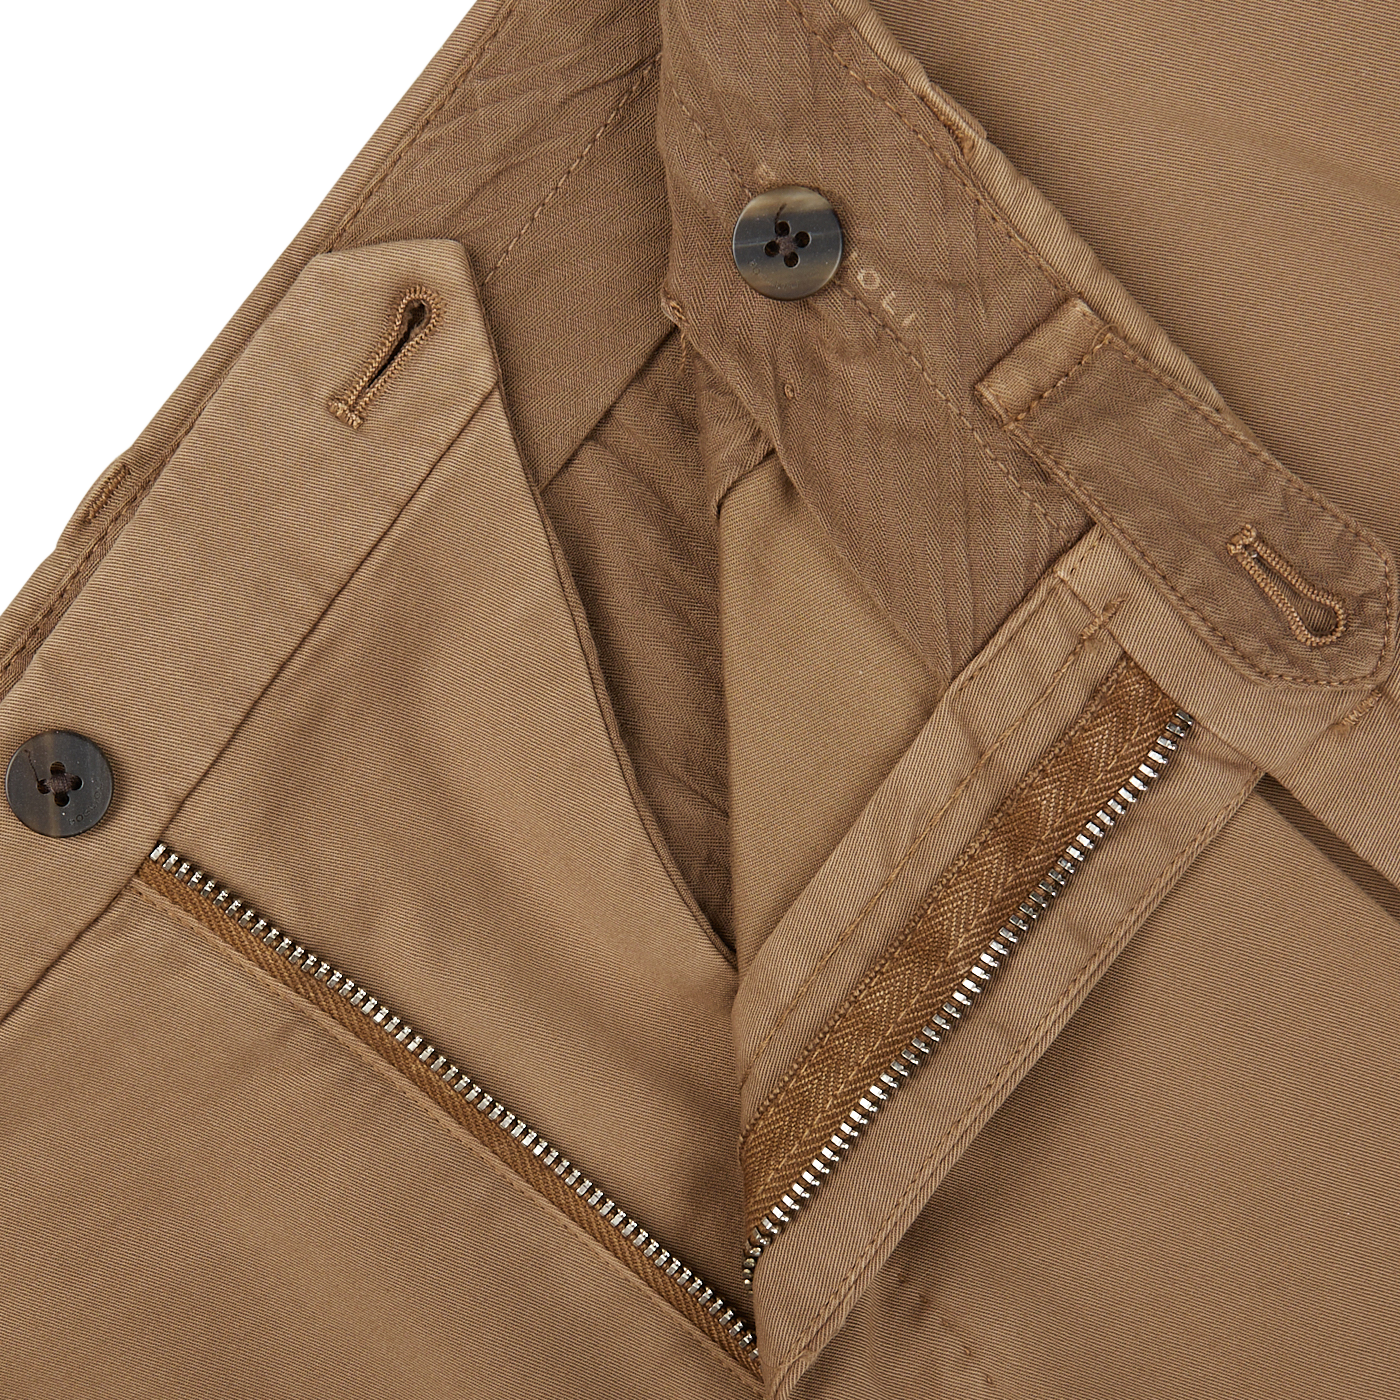 Close-up of Boglioli Tobacco Brown Washed Cotton Pleated Trousers with a zipper and button detail.